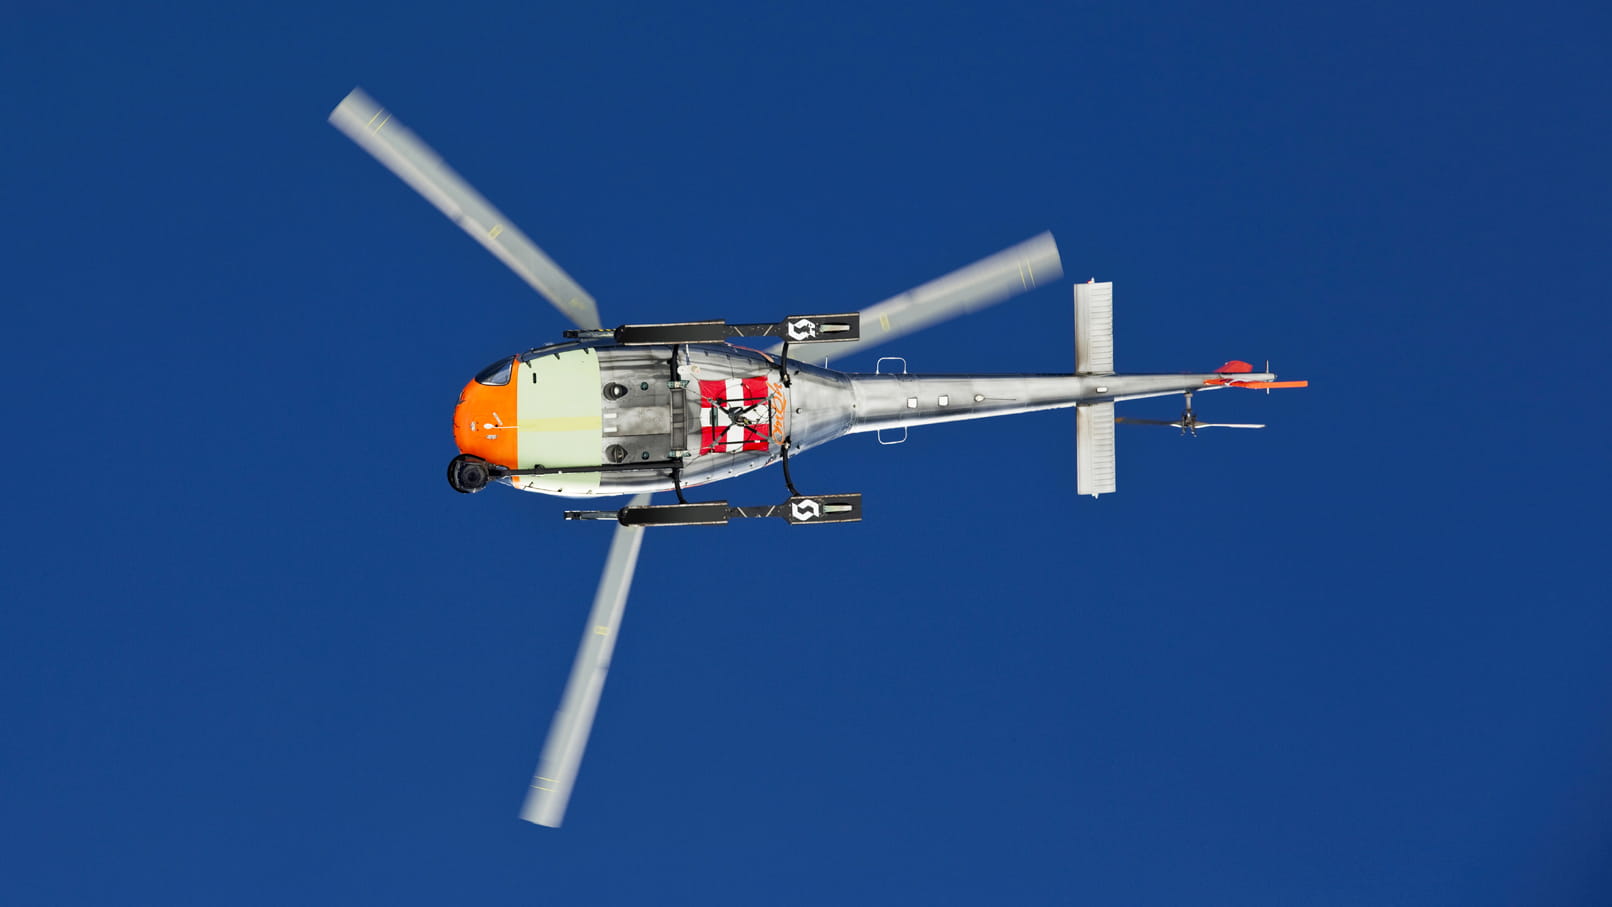 Airbus AS350 helicopter